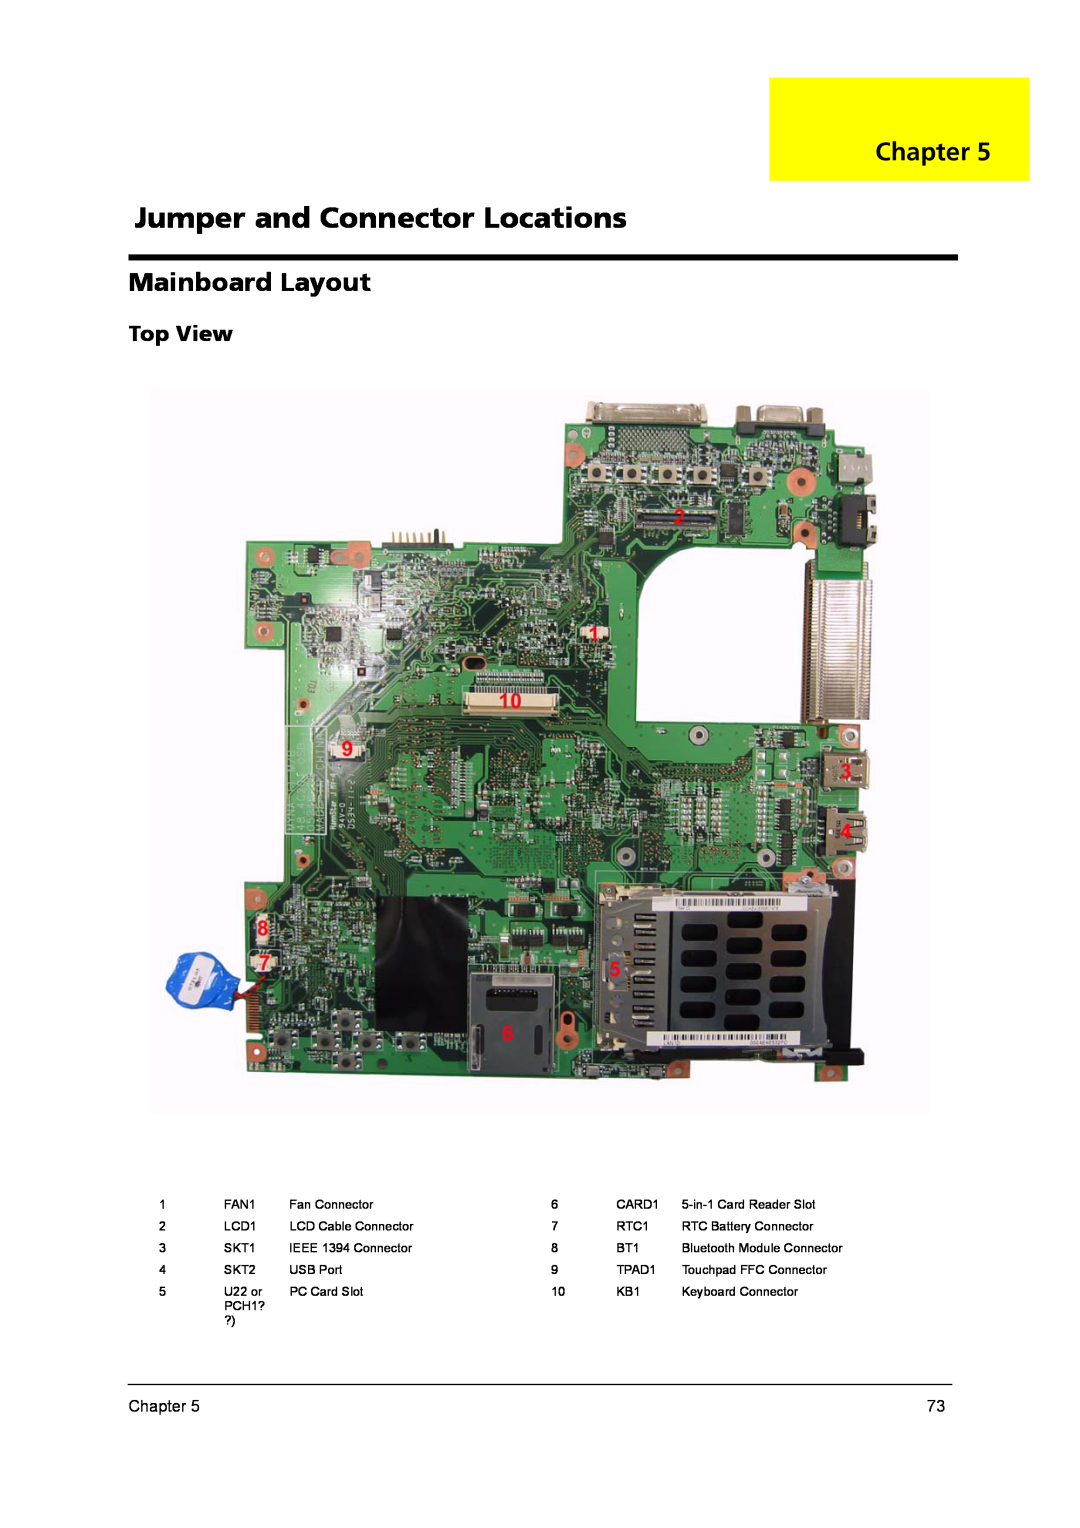 Acer LITEON PA-1650-02W, QD14TL0102, PLUTO MK6025GAS Jumper and Connector Locations, Chapter, Mainboard Layout, Top View 